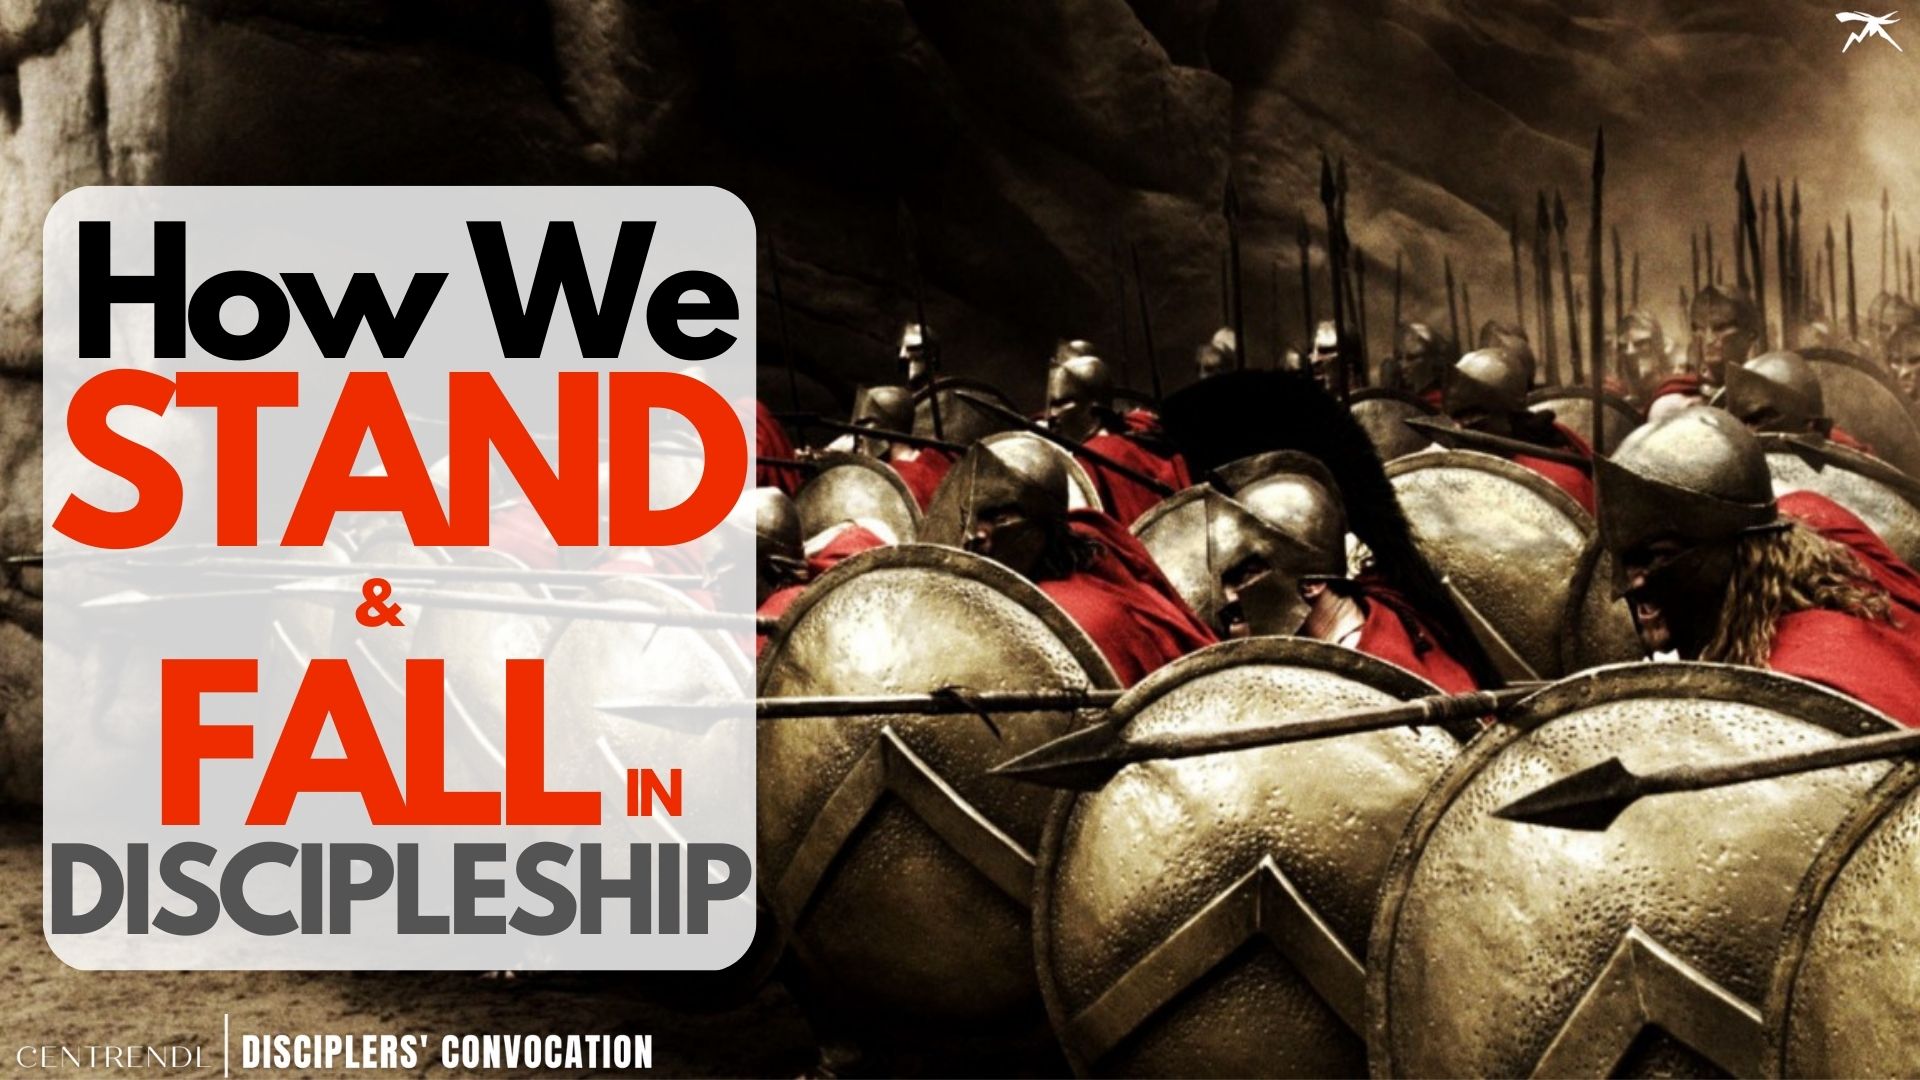  How We Stand and Fall in Discipleship